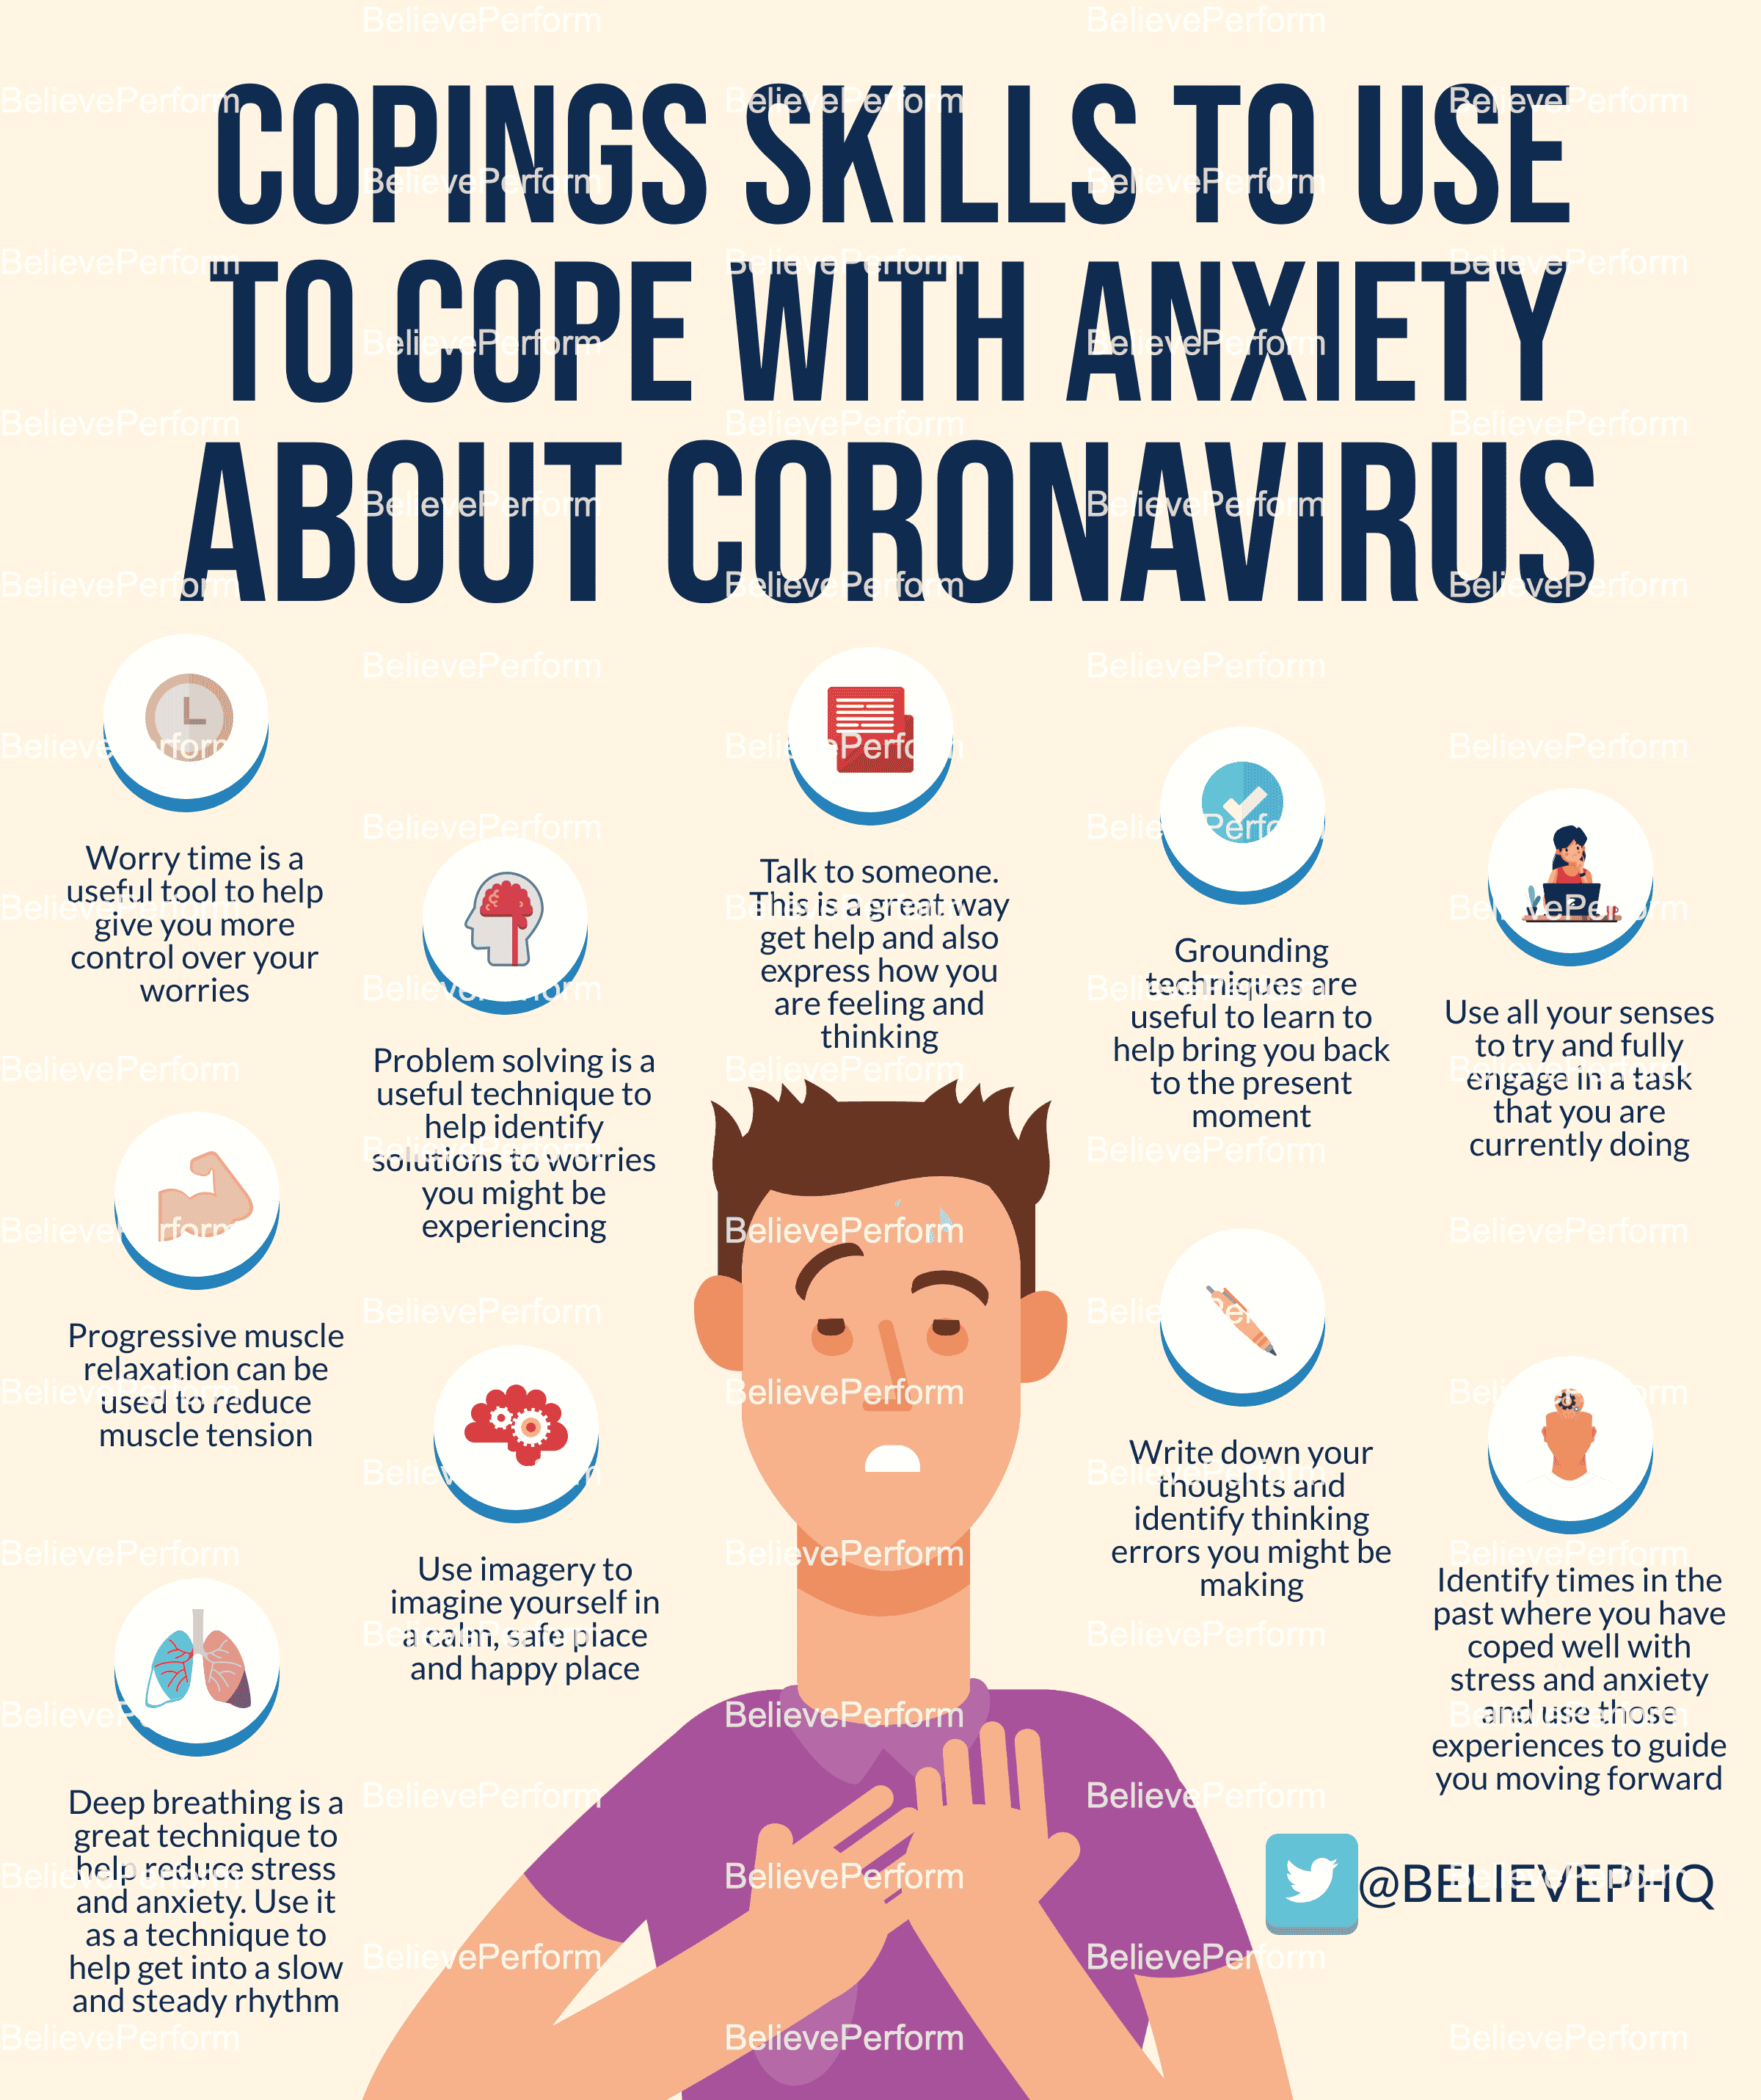 Copings skills to use to cope with anxiety about coronavirus ...